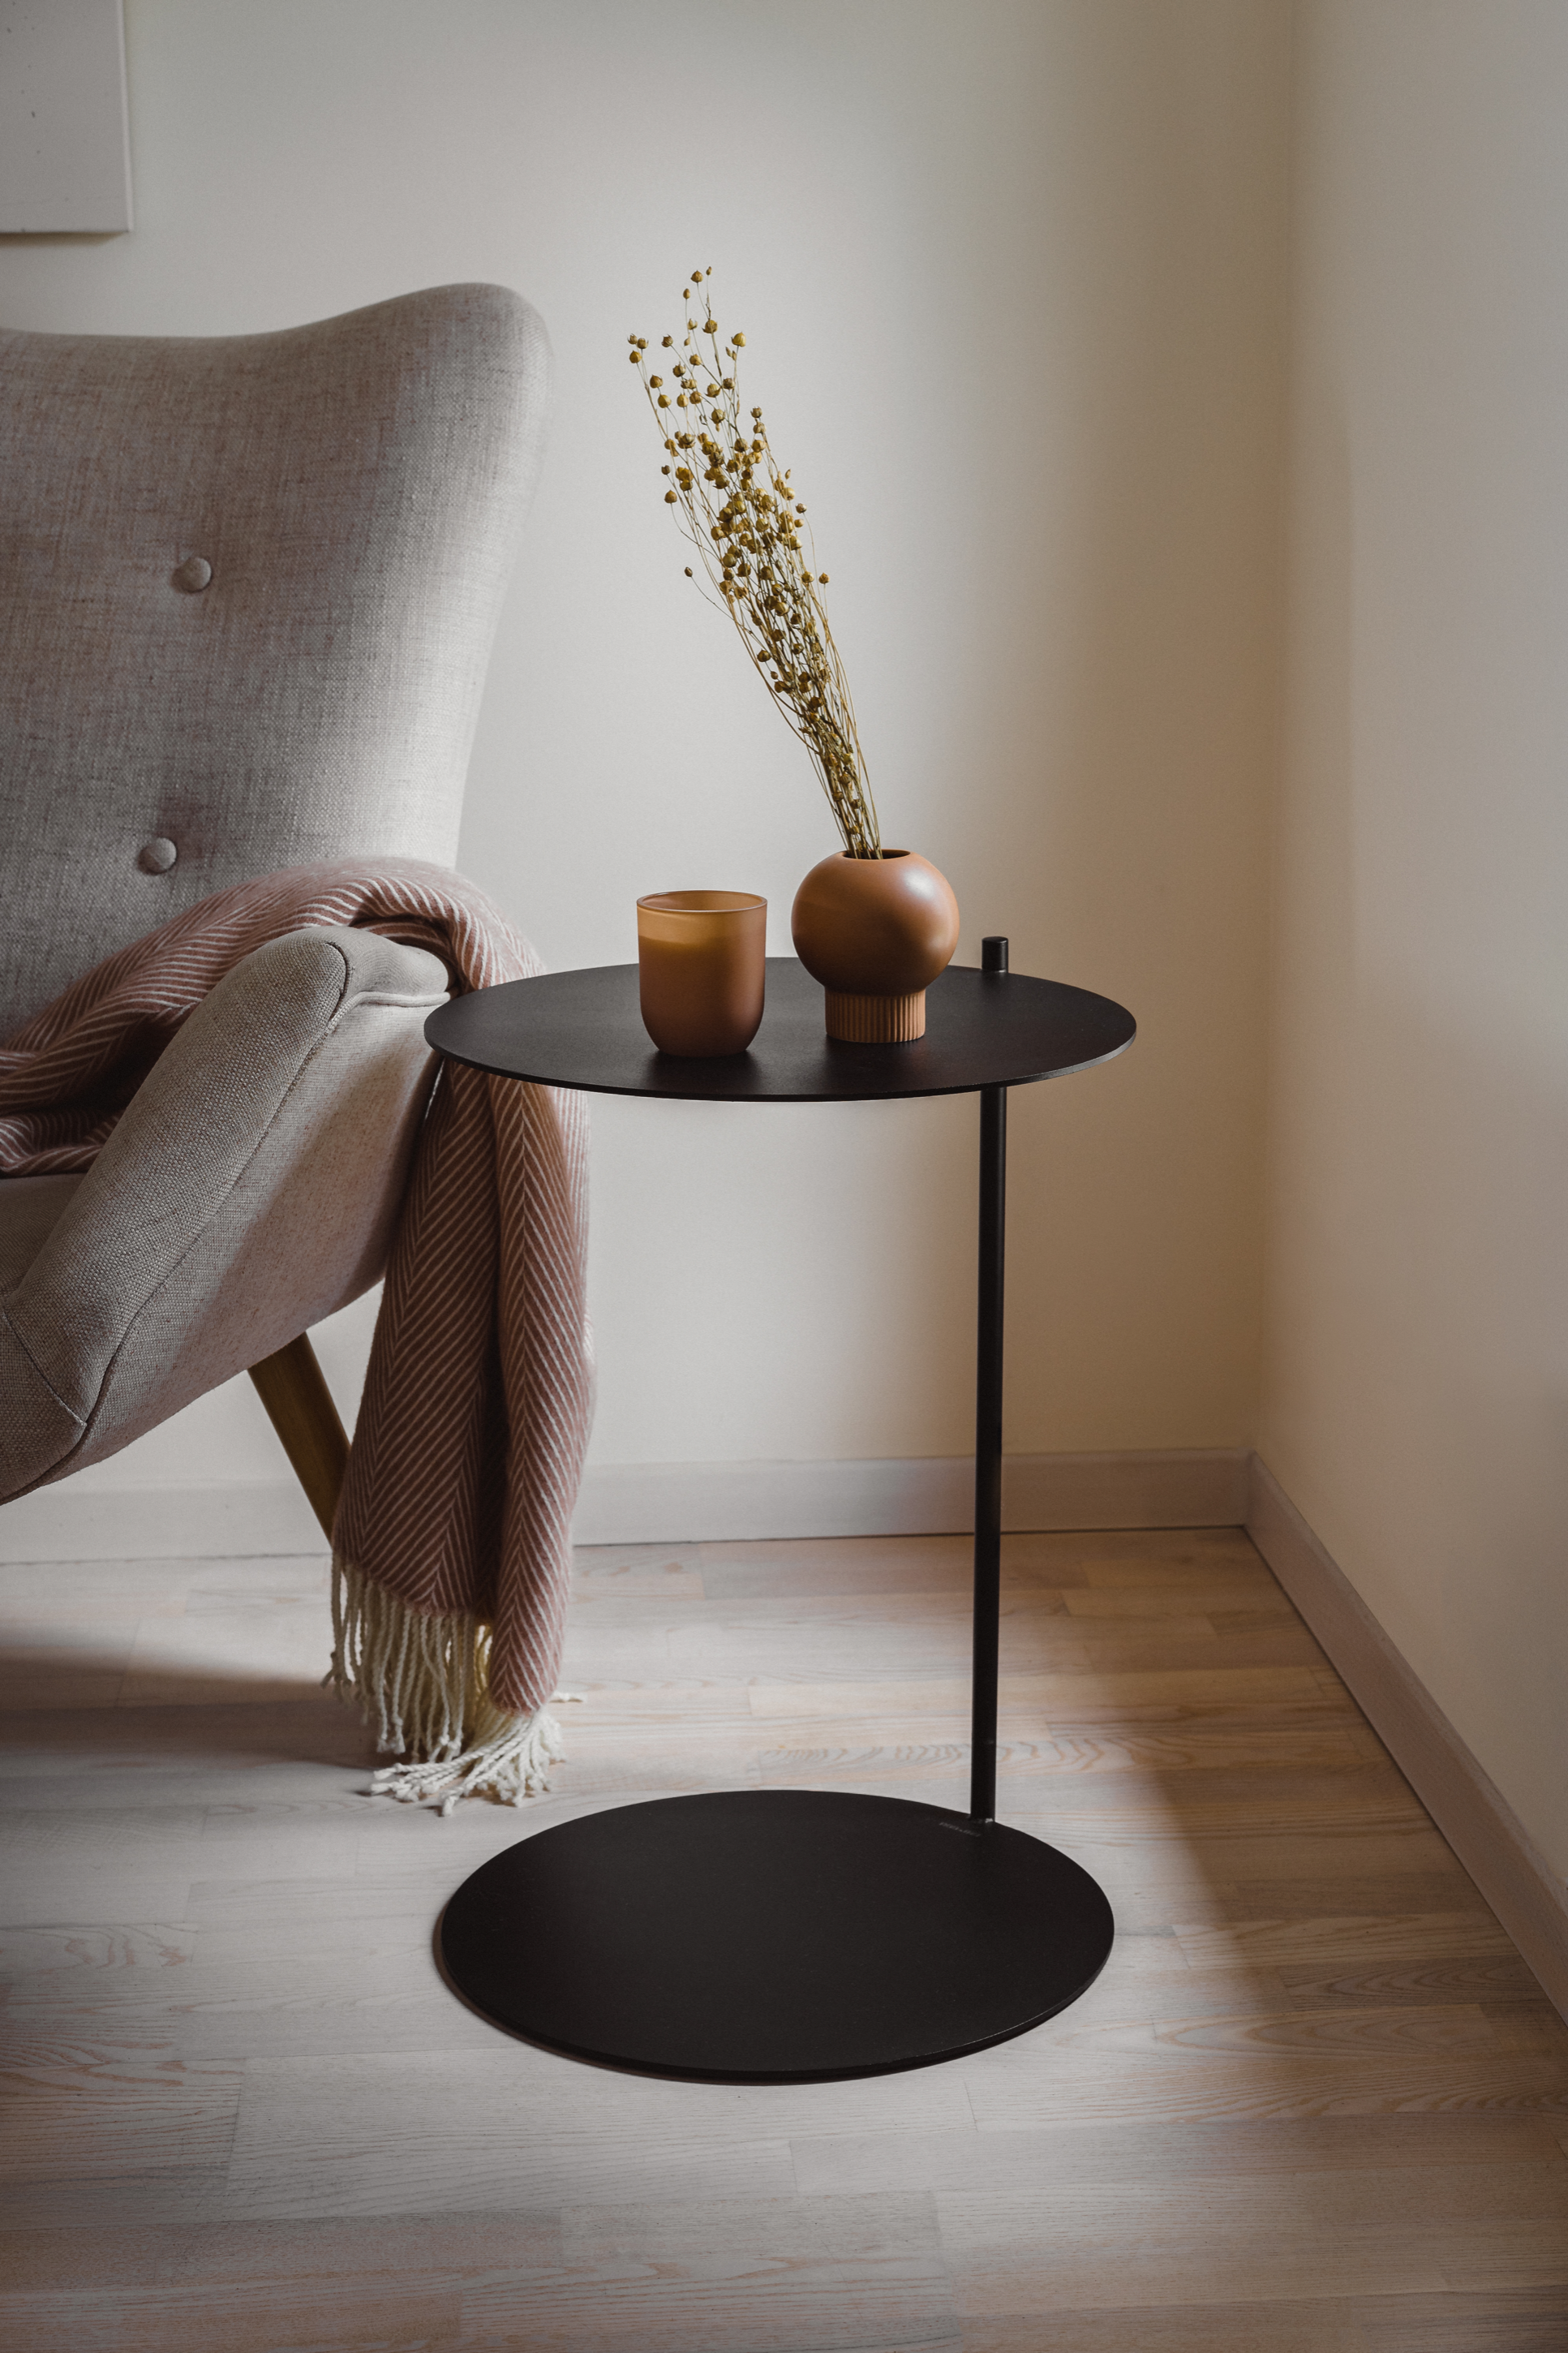 2x Ande Side Table